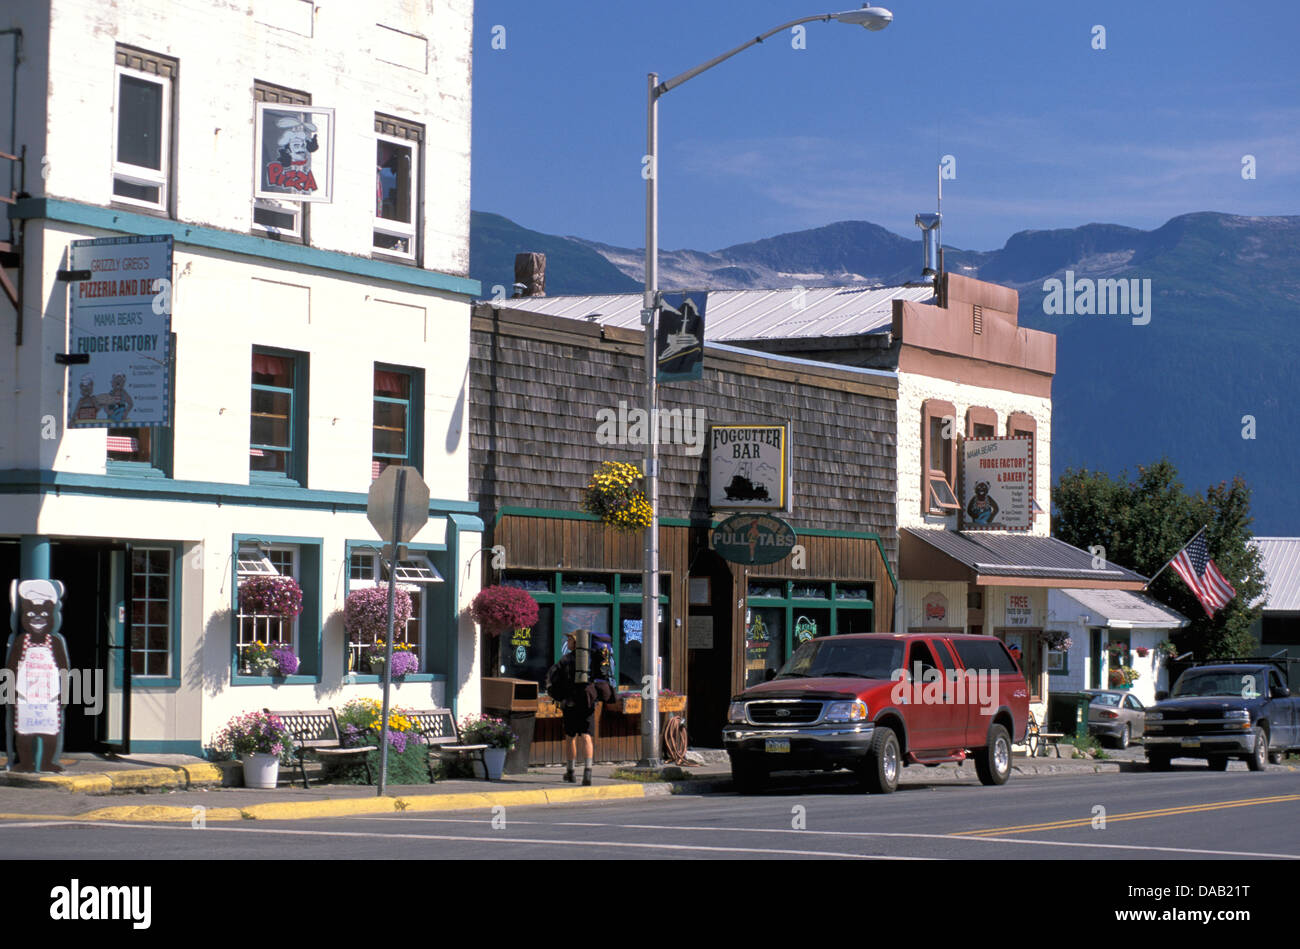 Haines, Alaska, USA, small town, old buildings, sunny, parked cars, flowers in pots, bar, blue sky Stock Photo